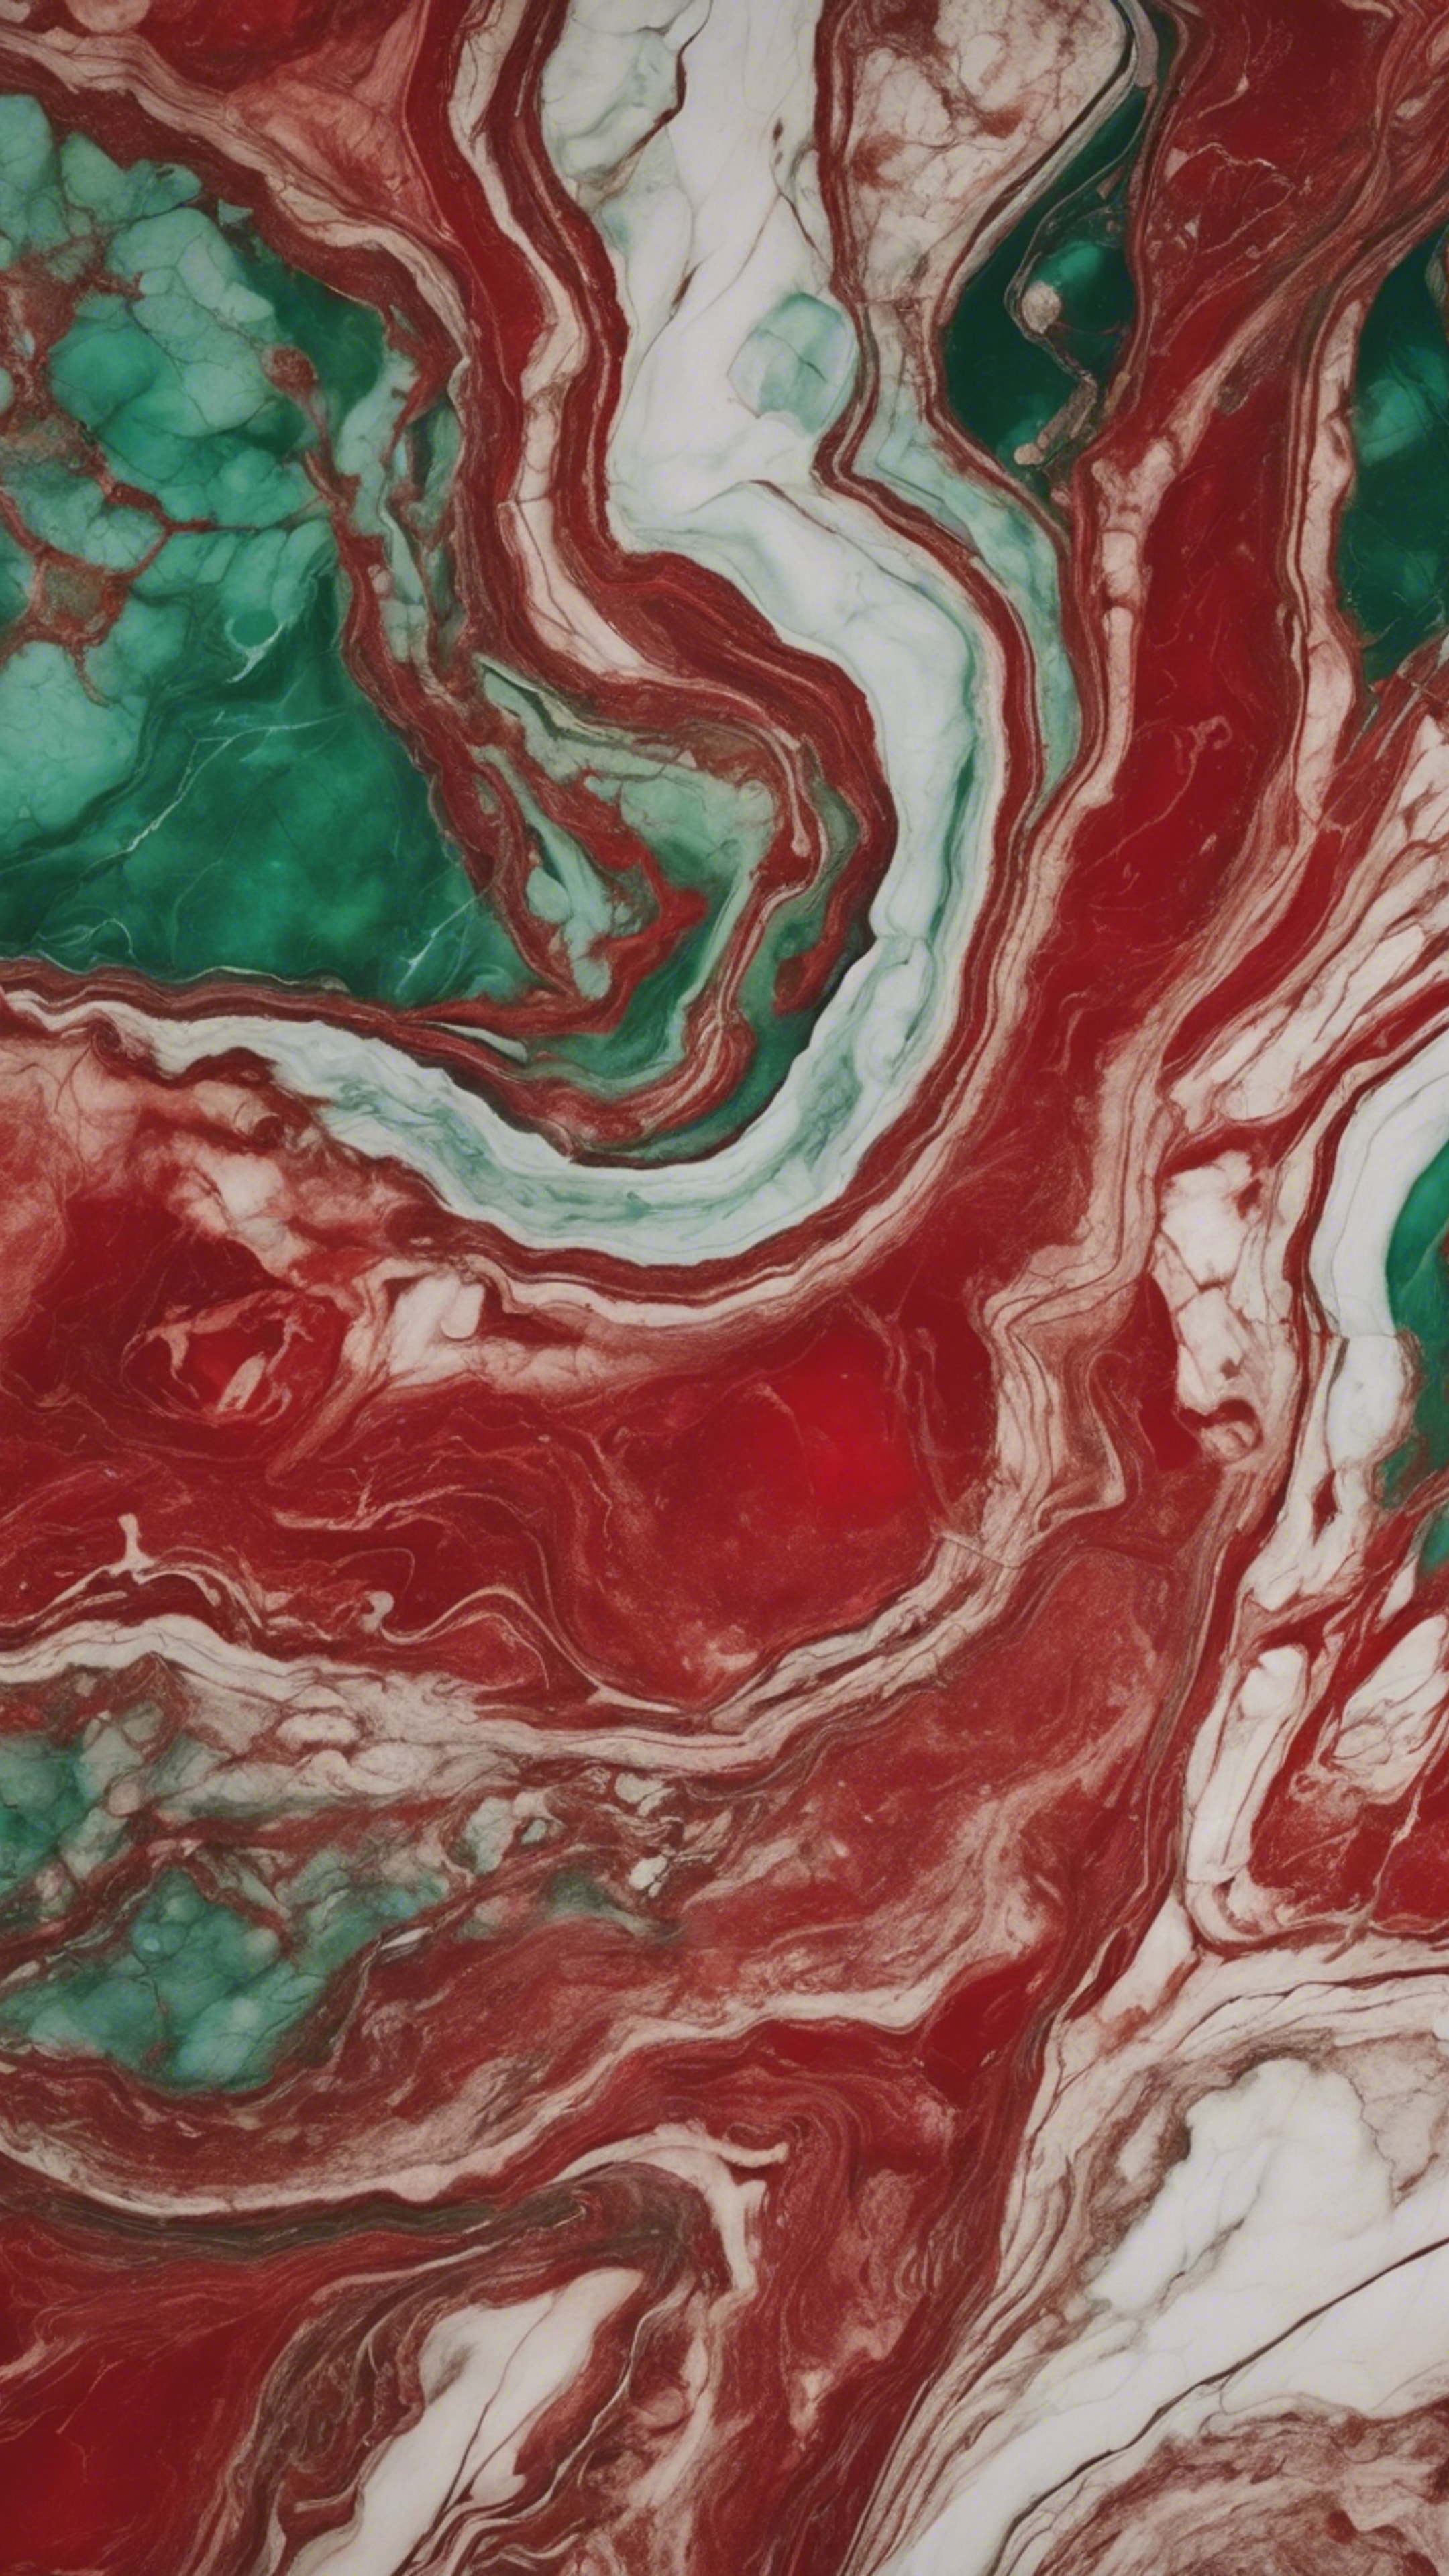 Elegant red and green marble pattern with veins running across. Валлпапер[edb4d3fbd47c4b239d5a]